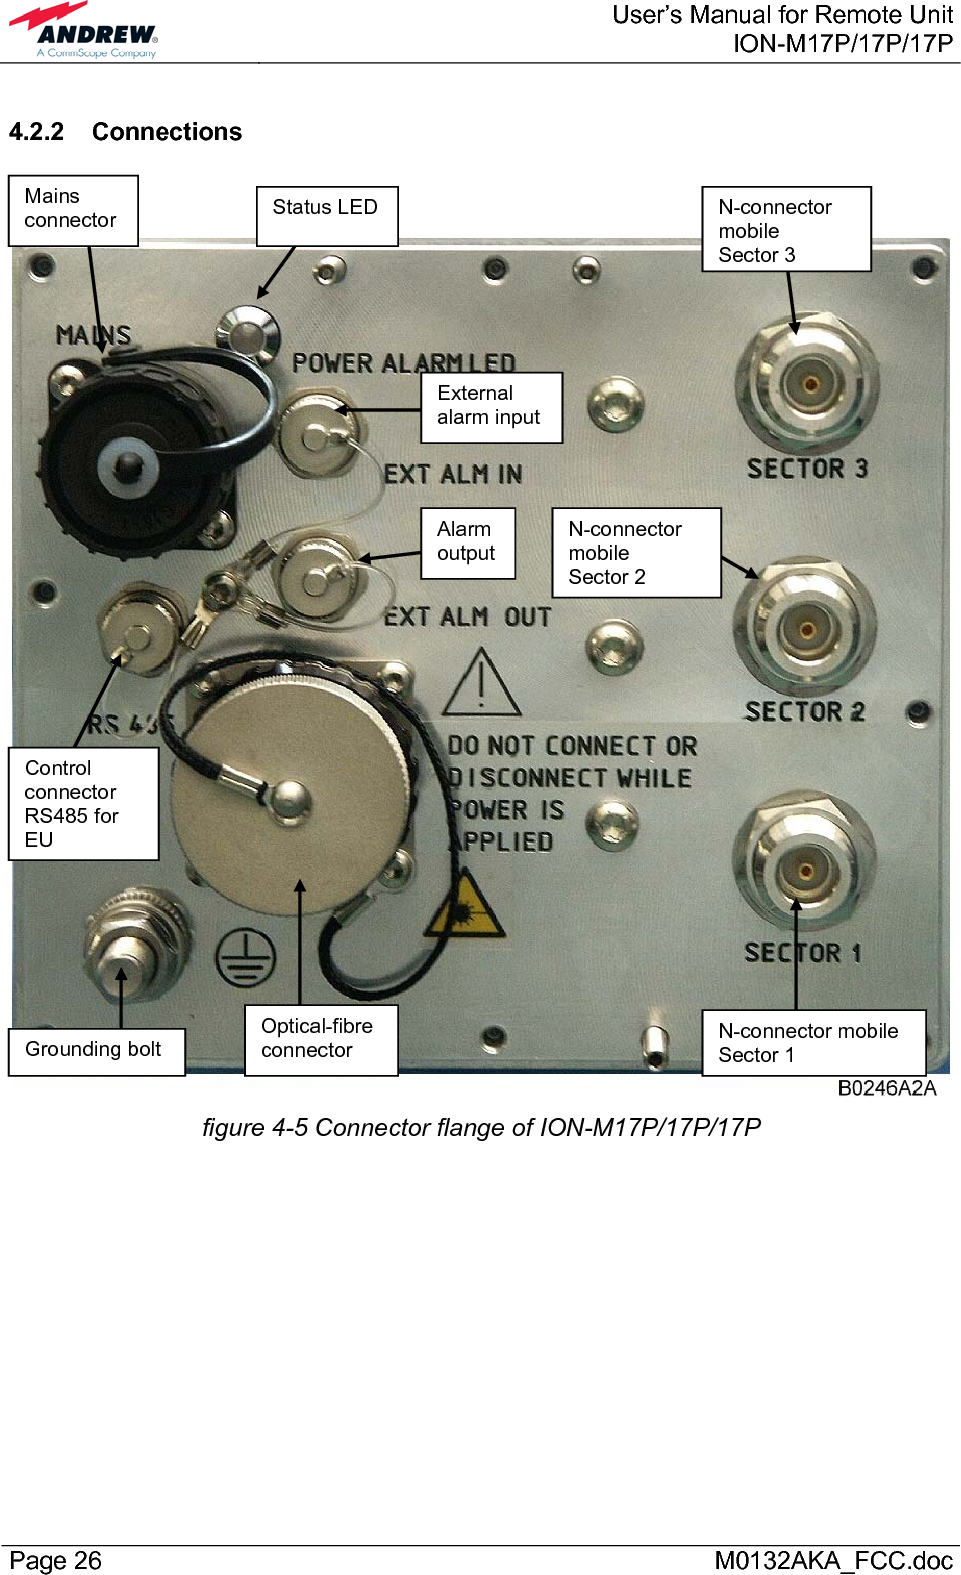  User’s Manual for Remote UnitION-M17P/17P/17P Page 26      M0132AKA_FCC.doc 4.2.2 Connections     figure 4-5 Connector flange of ION-M17P/17P/17P   Alarm output Mains connector Grounding bolt  N-connector mobile Sector 1 External alarm input N-connector mobile Sector 3 Optical-fibre connector Control  connector RS485 for  EU Status LED N-connector mobile Sector 2 